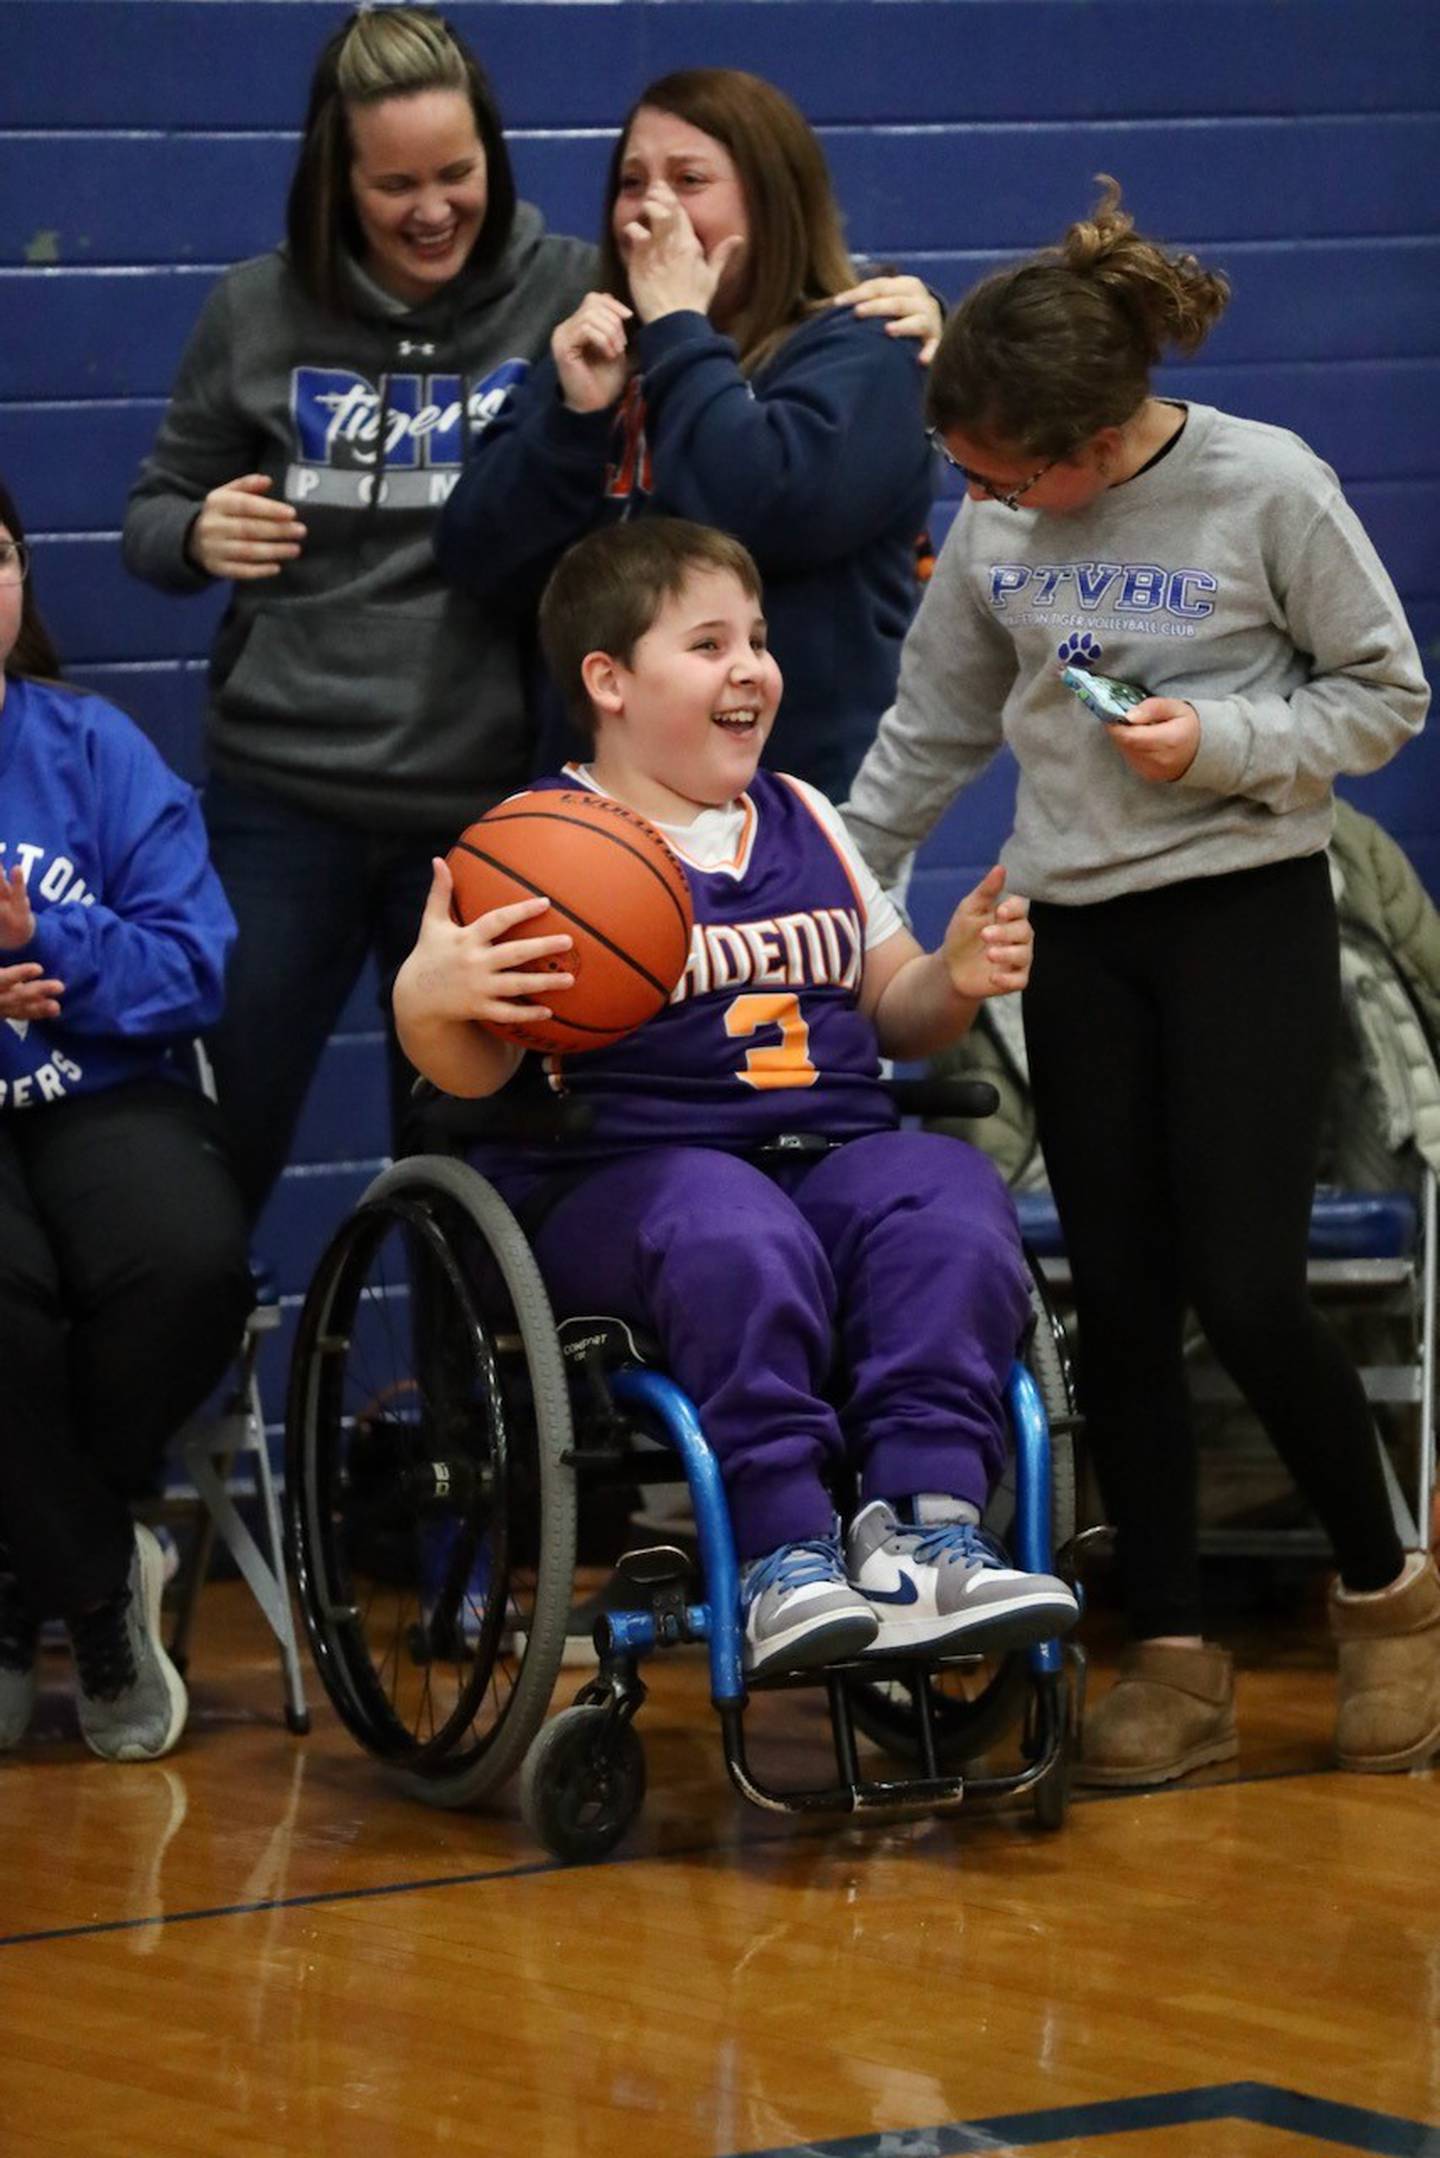 Zane Britton is all smiles after receiving the game ball from Teegan Davis after the Princeton senior scored his 1,000th career in Friday's game against Hall at Prouty Gym.